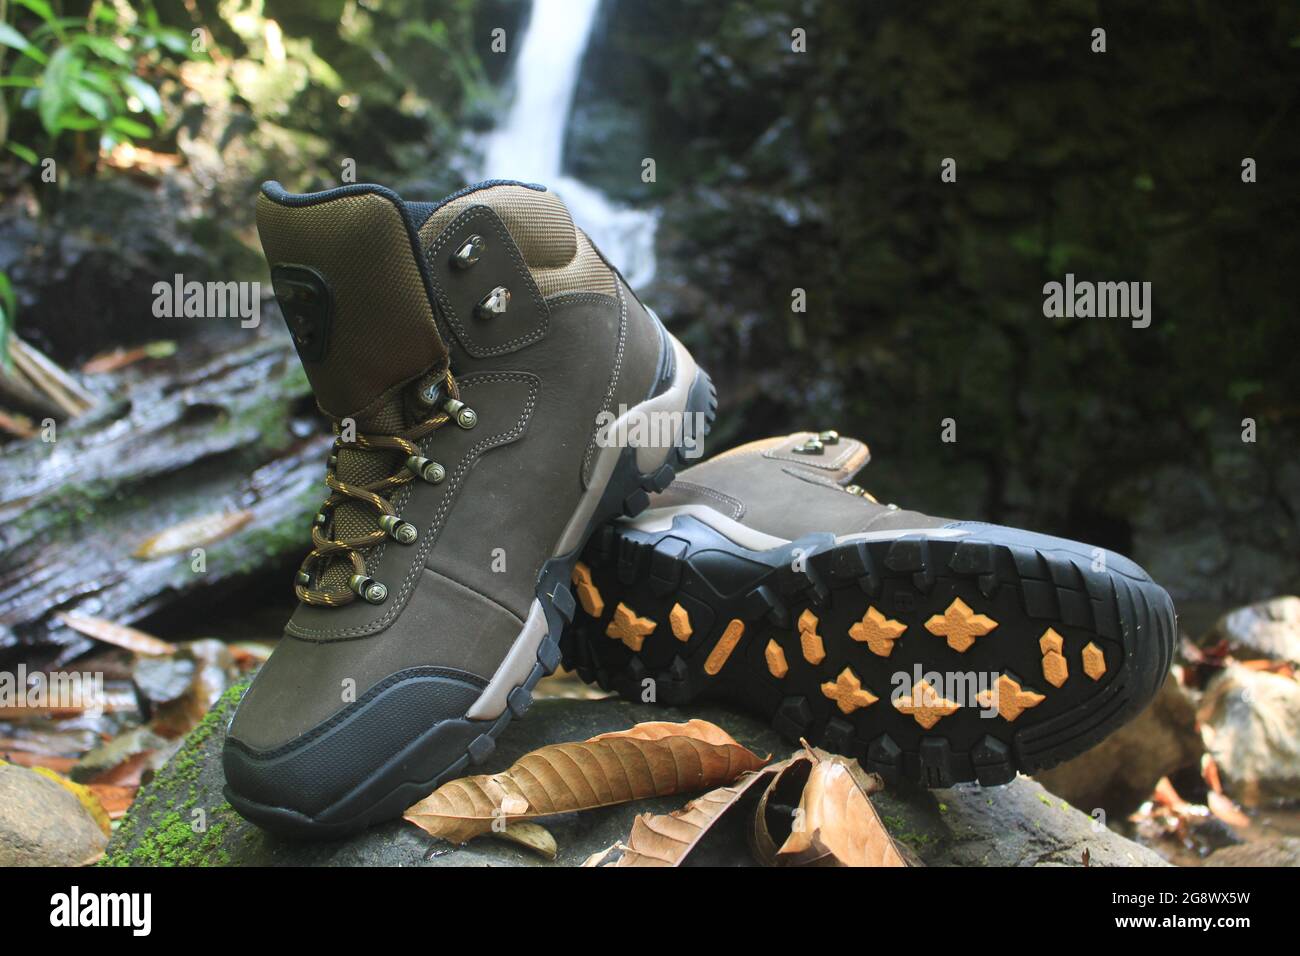 boots with a masculine design for outdoor adventure activities, with jagged soles suitable for tropical and snowy terrain. Stock Photo